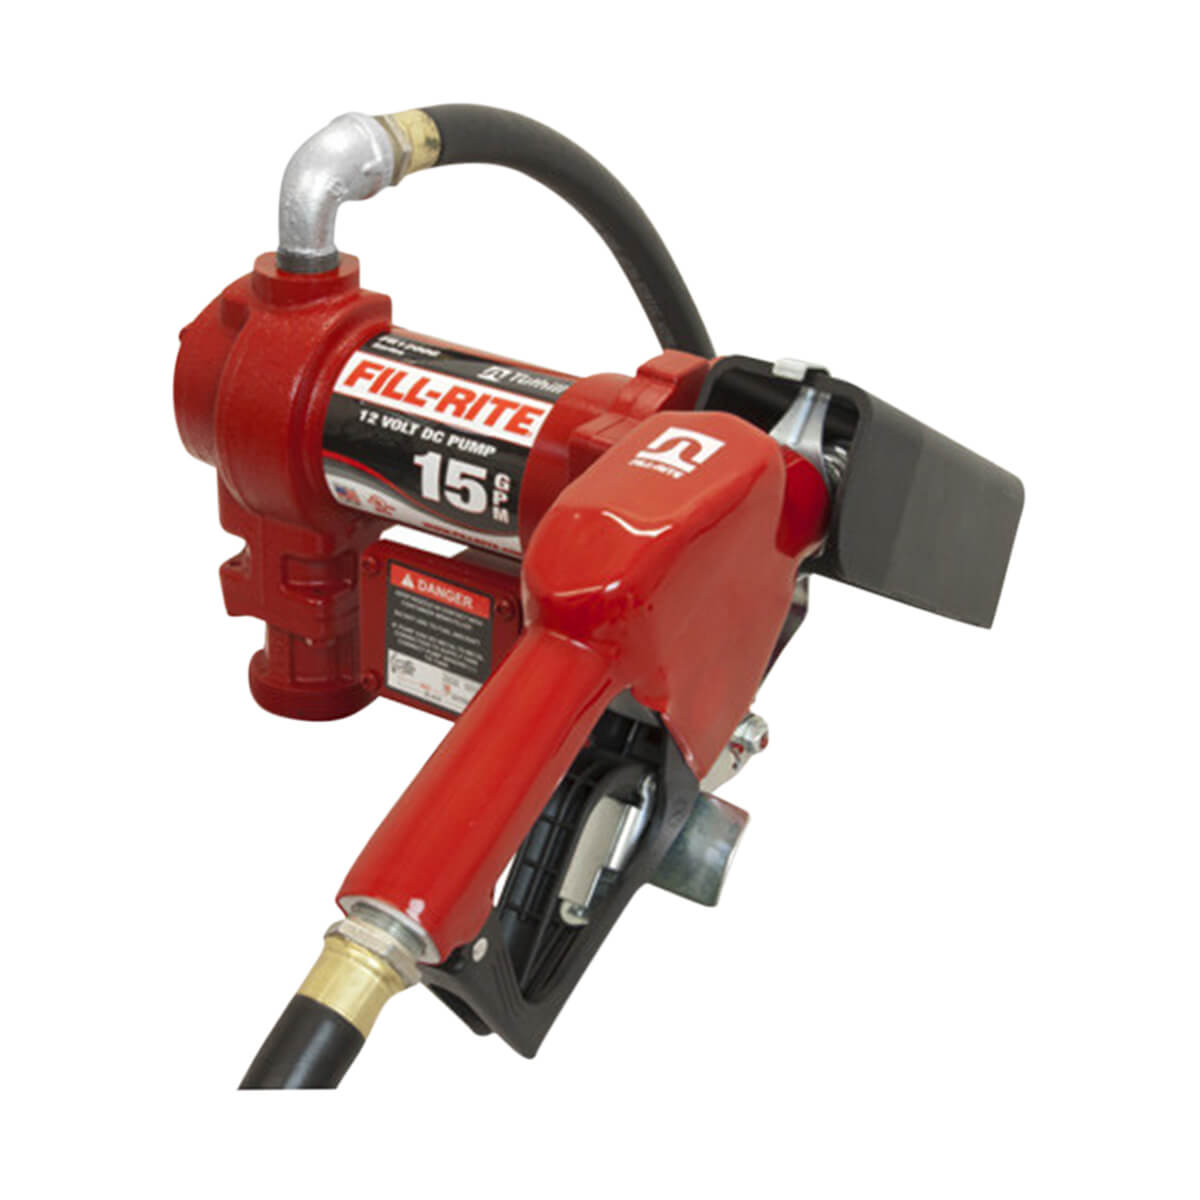 12V DC Pump with Hose and Automatic Nozzle